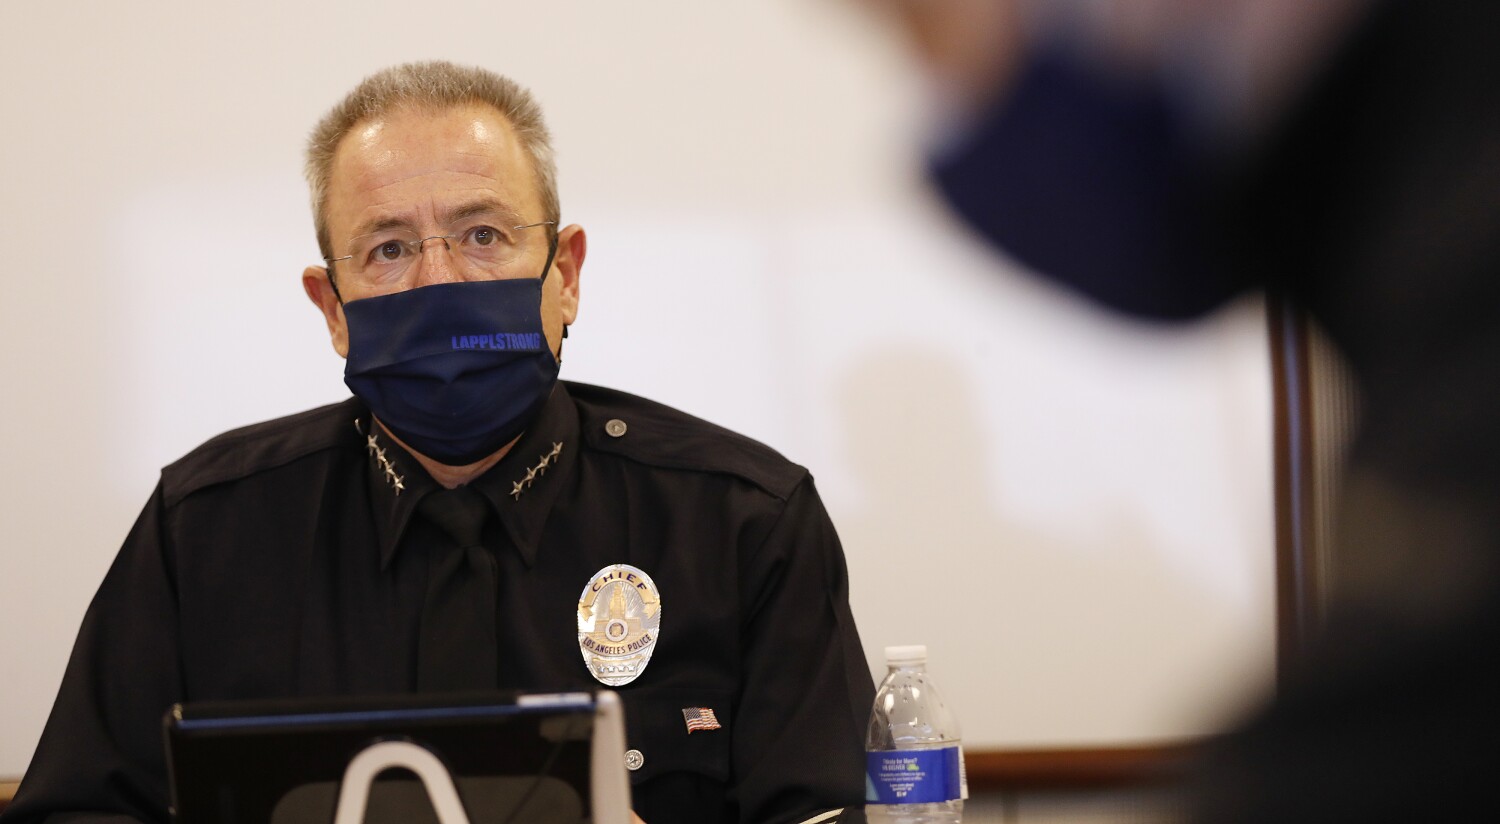 LAPD got hundreds of complaints about officers not wearing COVID masks, but punished few